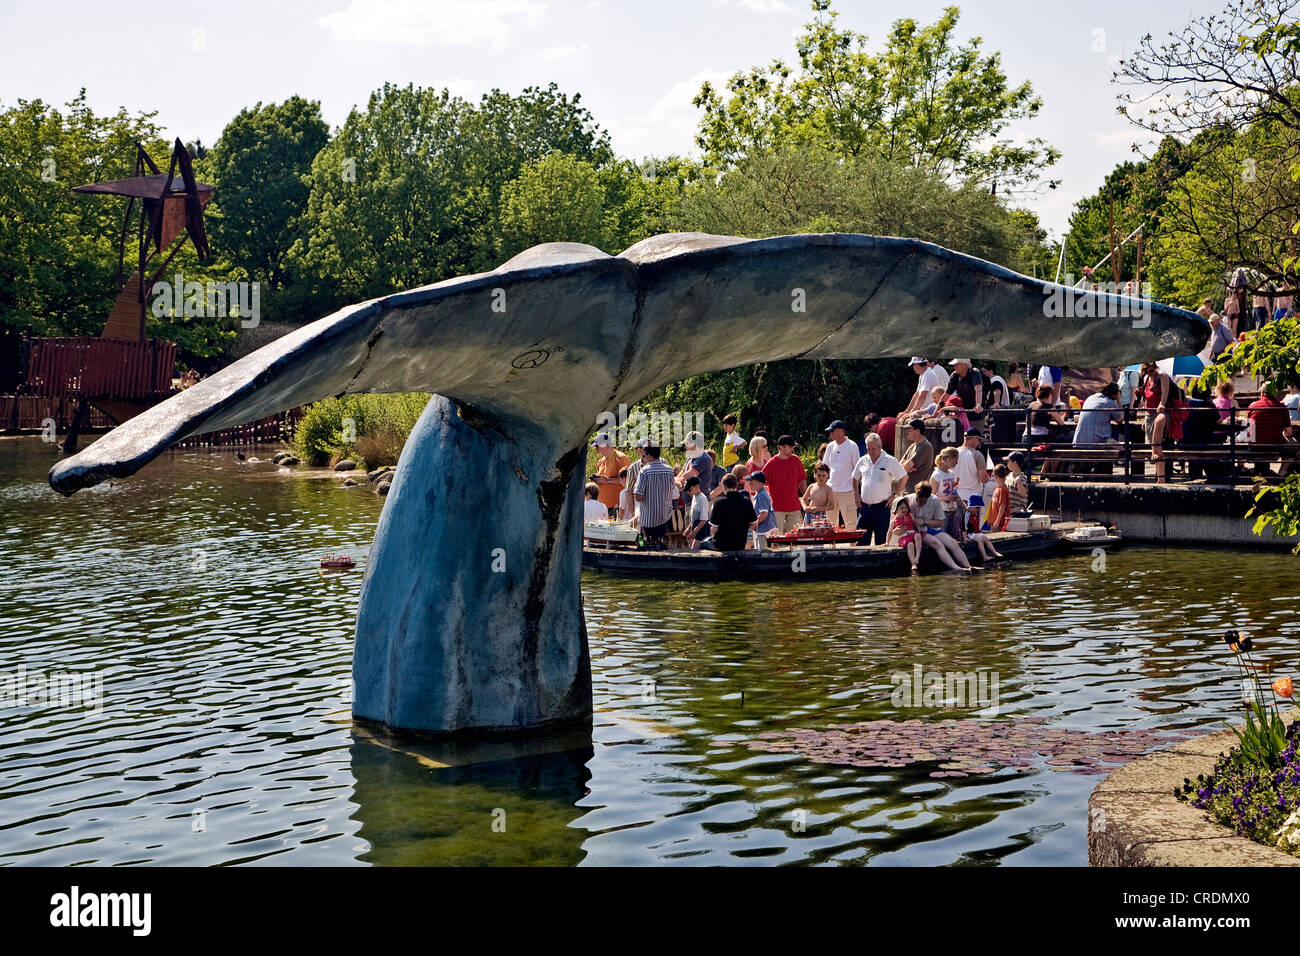 statue in form of a whale fin in the Maximilian Park, Germany, North Rhine-Westphalia, Ruhr Area, Hamm Stock Photo